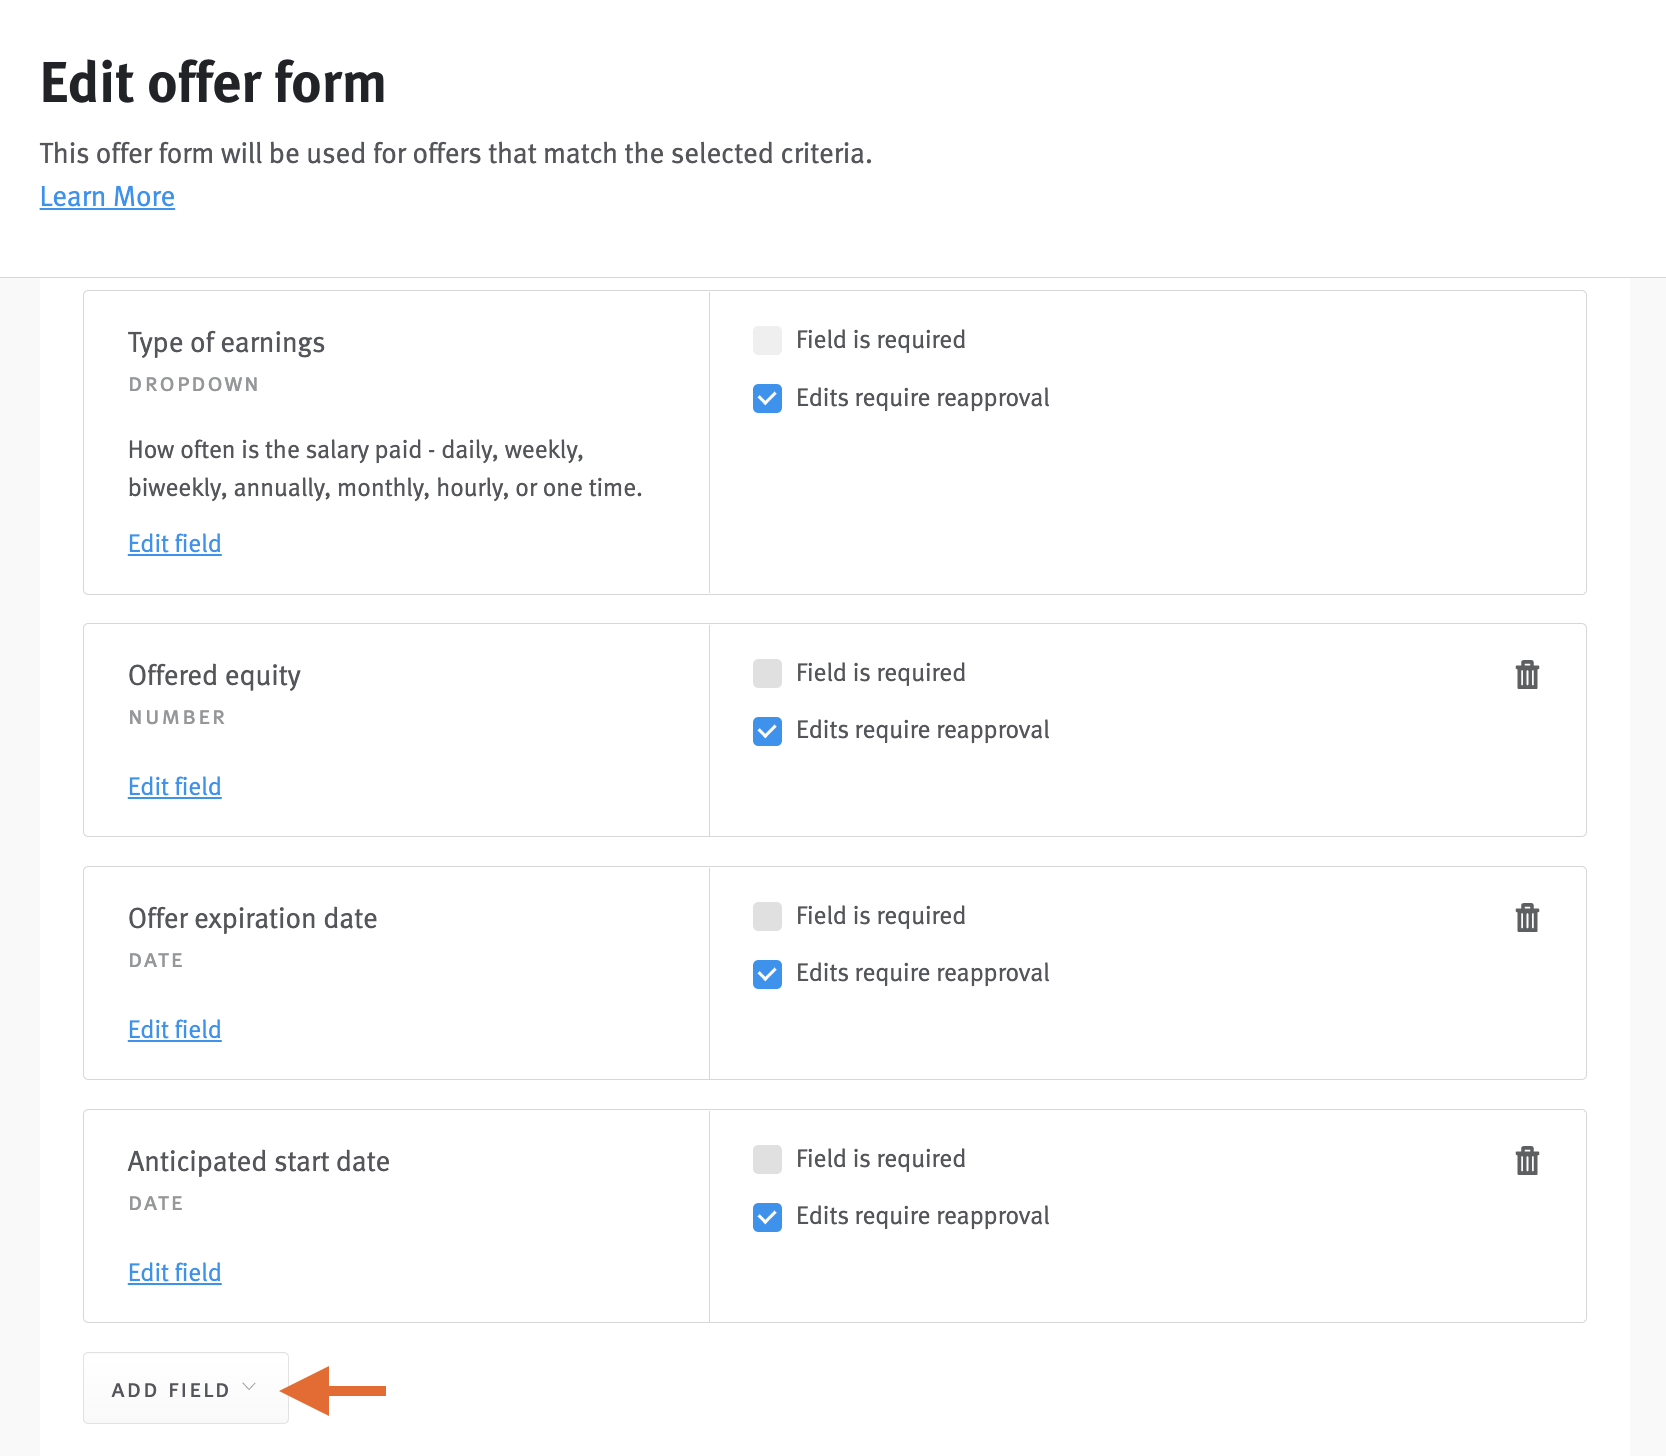 Offer form editor with arrow pointing to Add Field button.